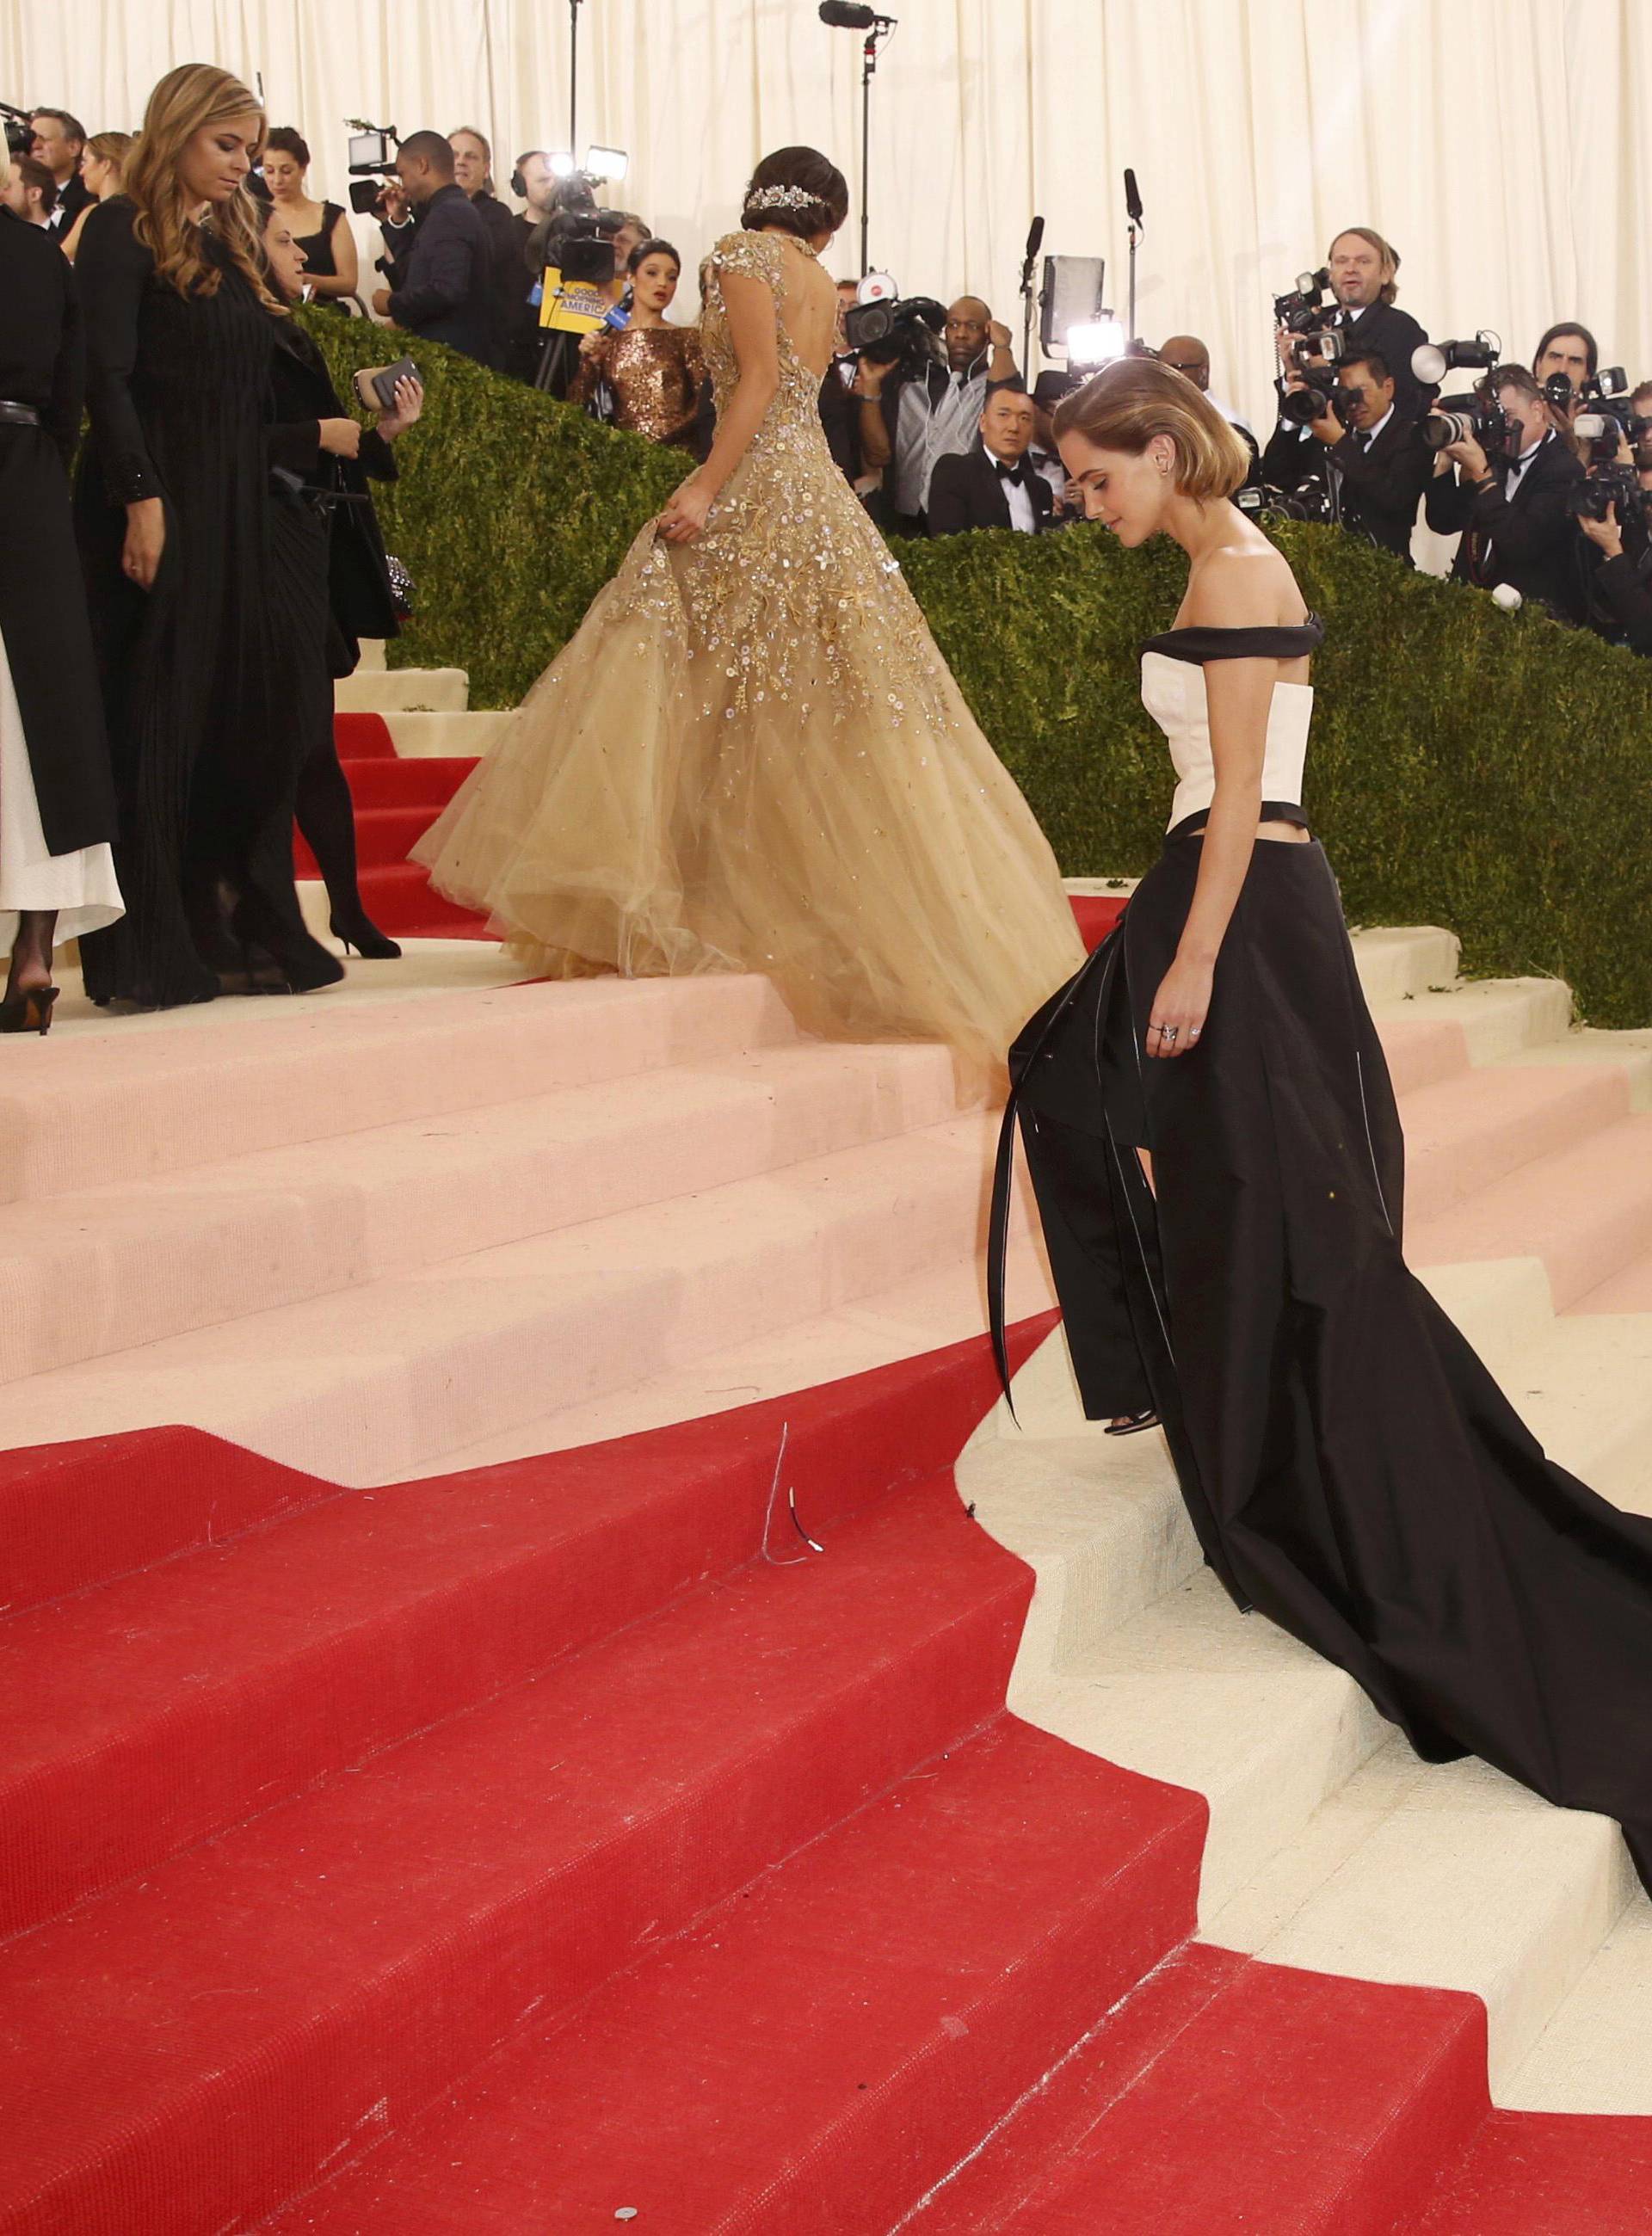 Actress Emma Watson arrives at the Met Gala in New York